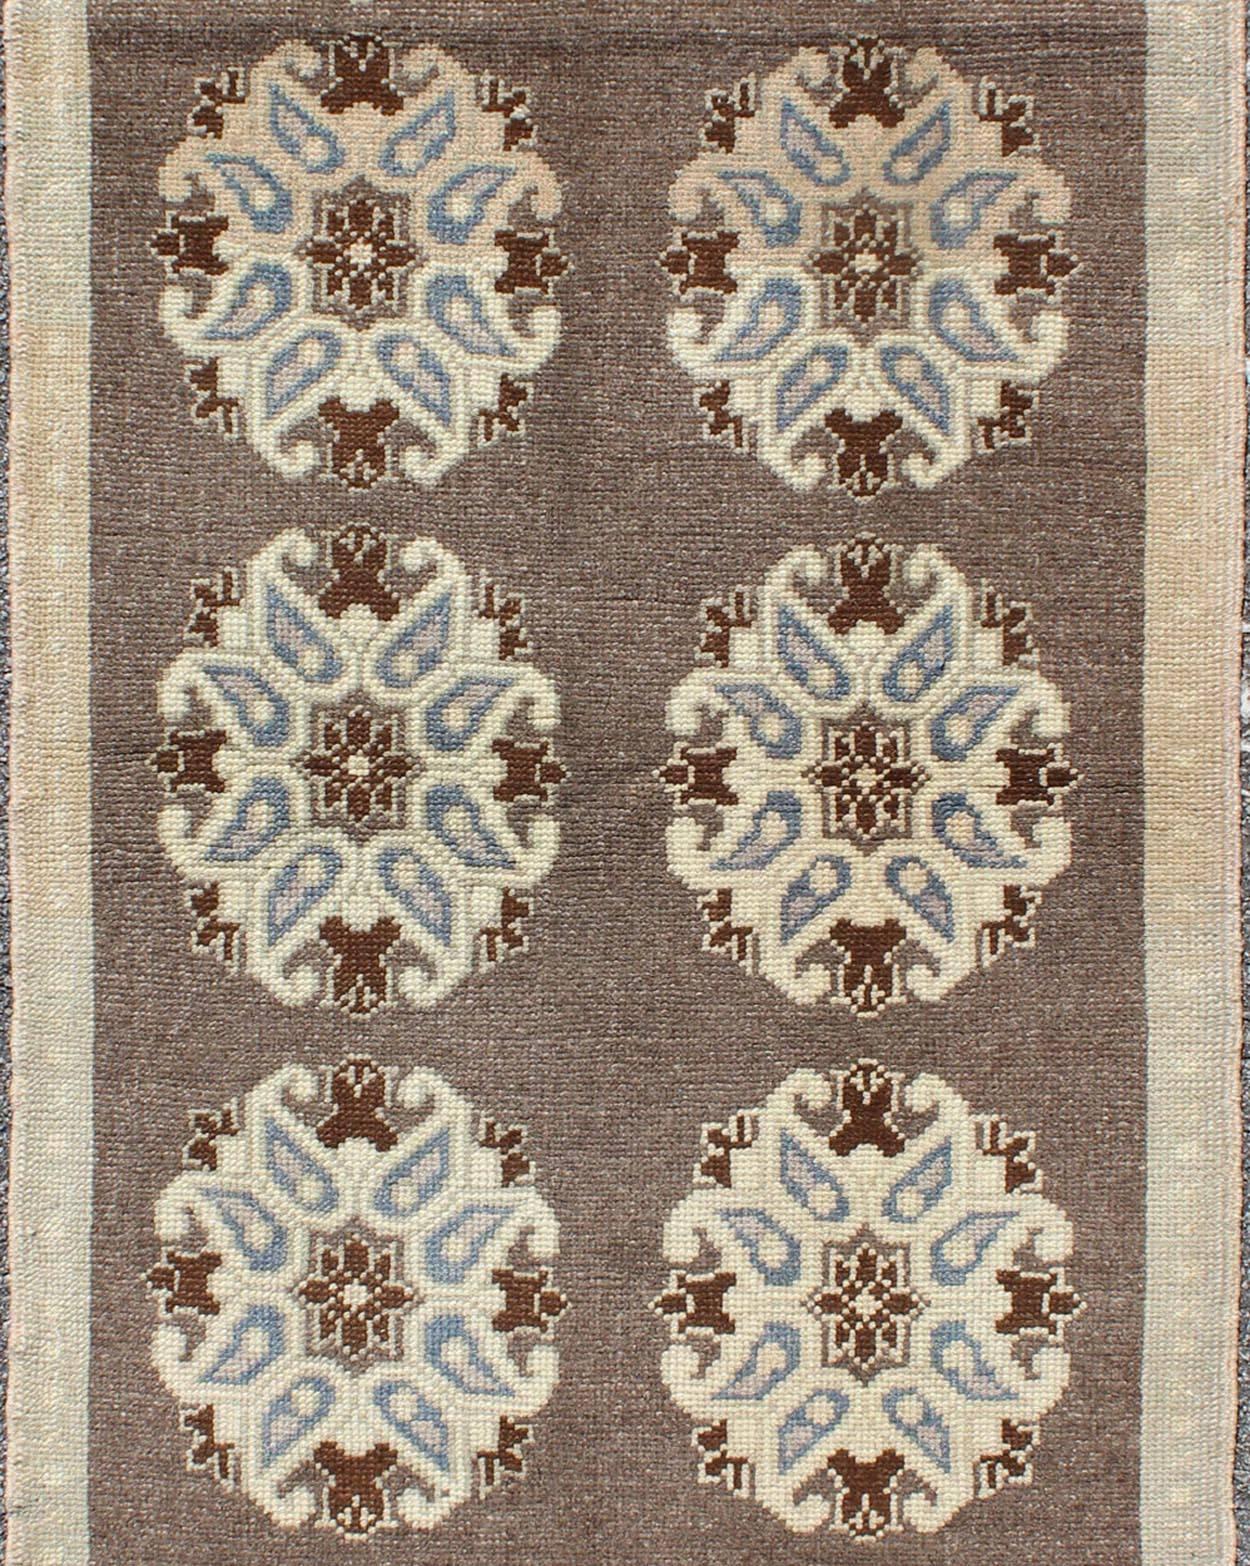 Tribal Turkish Oushak Carpet with Floral Medallions in Taupe, Ivory and Blue In Excellent Condition For Sale In Atlanta, GA